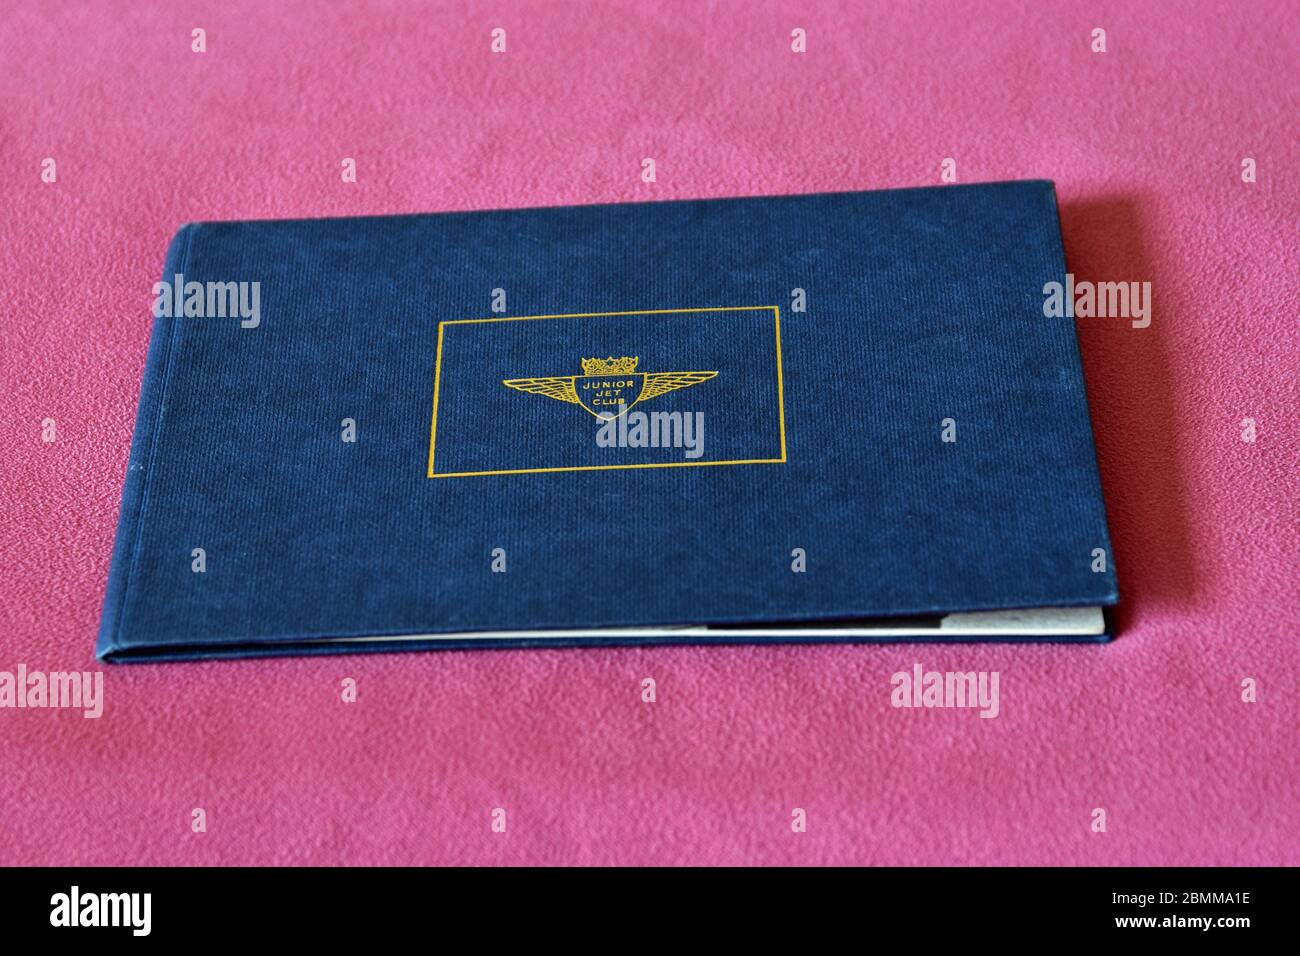 Authentic vintage junior jet club logbook from 1970s on pink fabric background Stock Photo